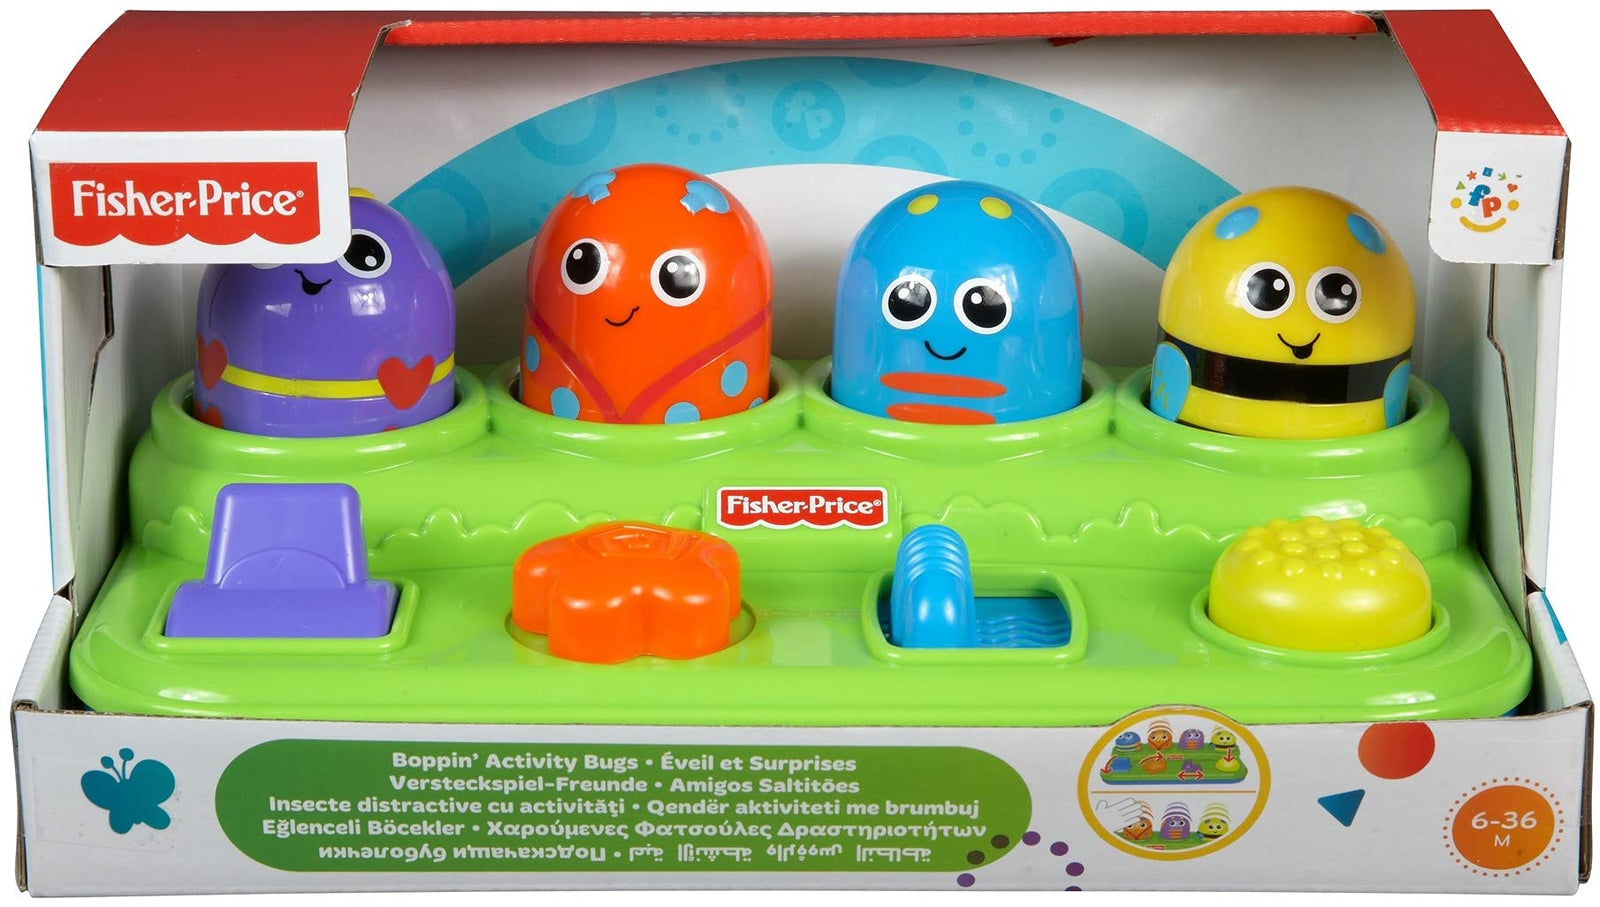 Fisher-Price Brilliant Basics Boppin' Activity Bugs [Amazon Exclusive], 11.5 x 6.2 x 3.8 inches ; 1.5 pounds